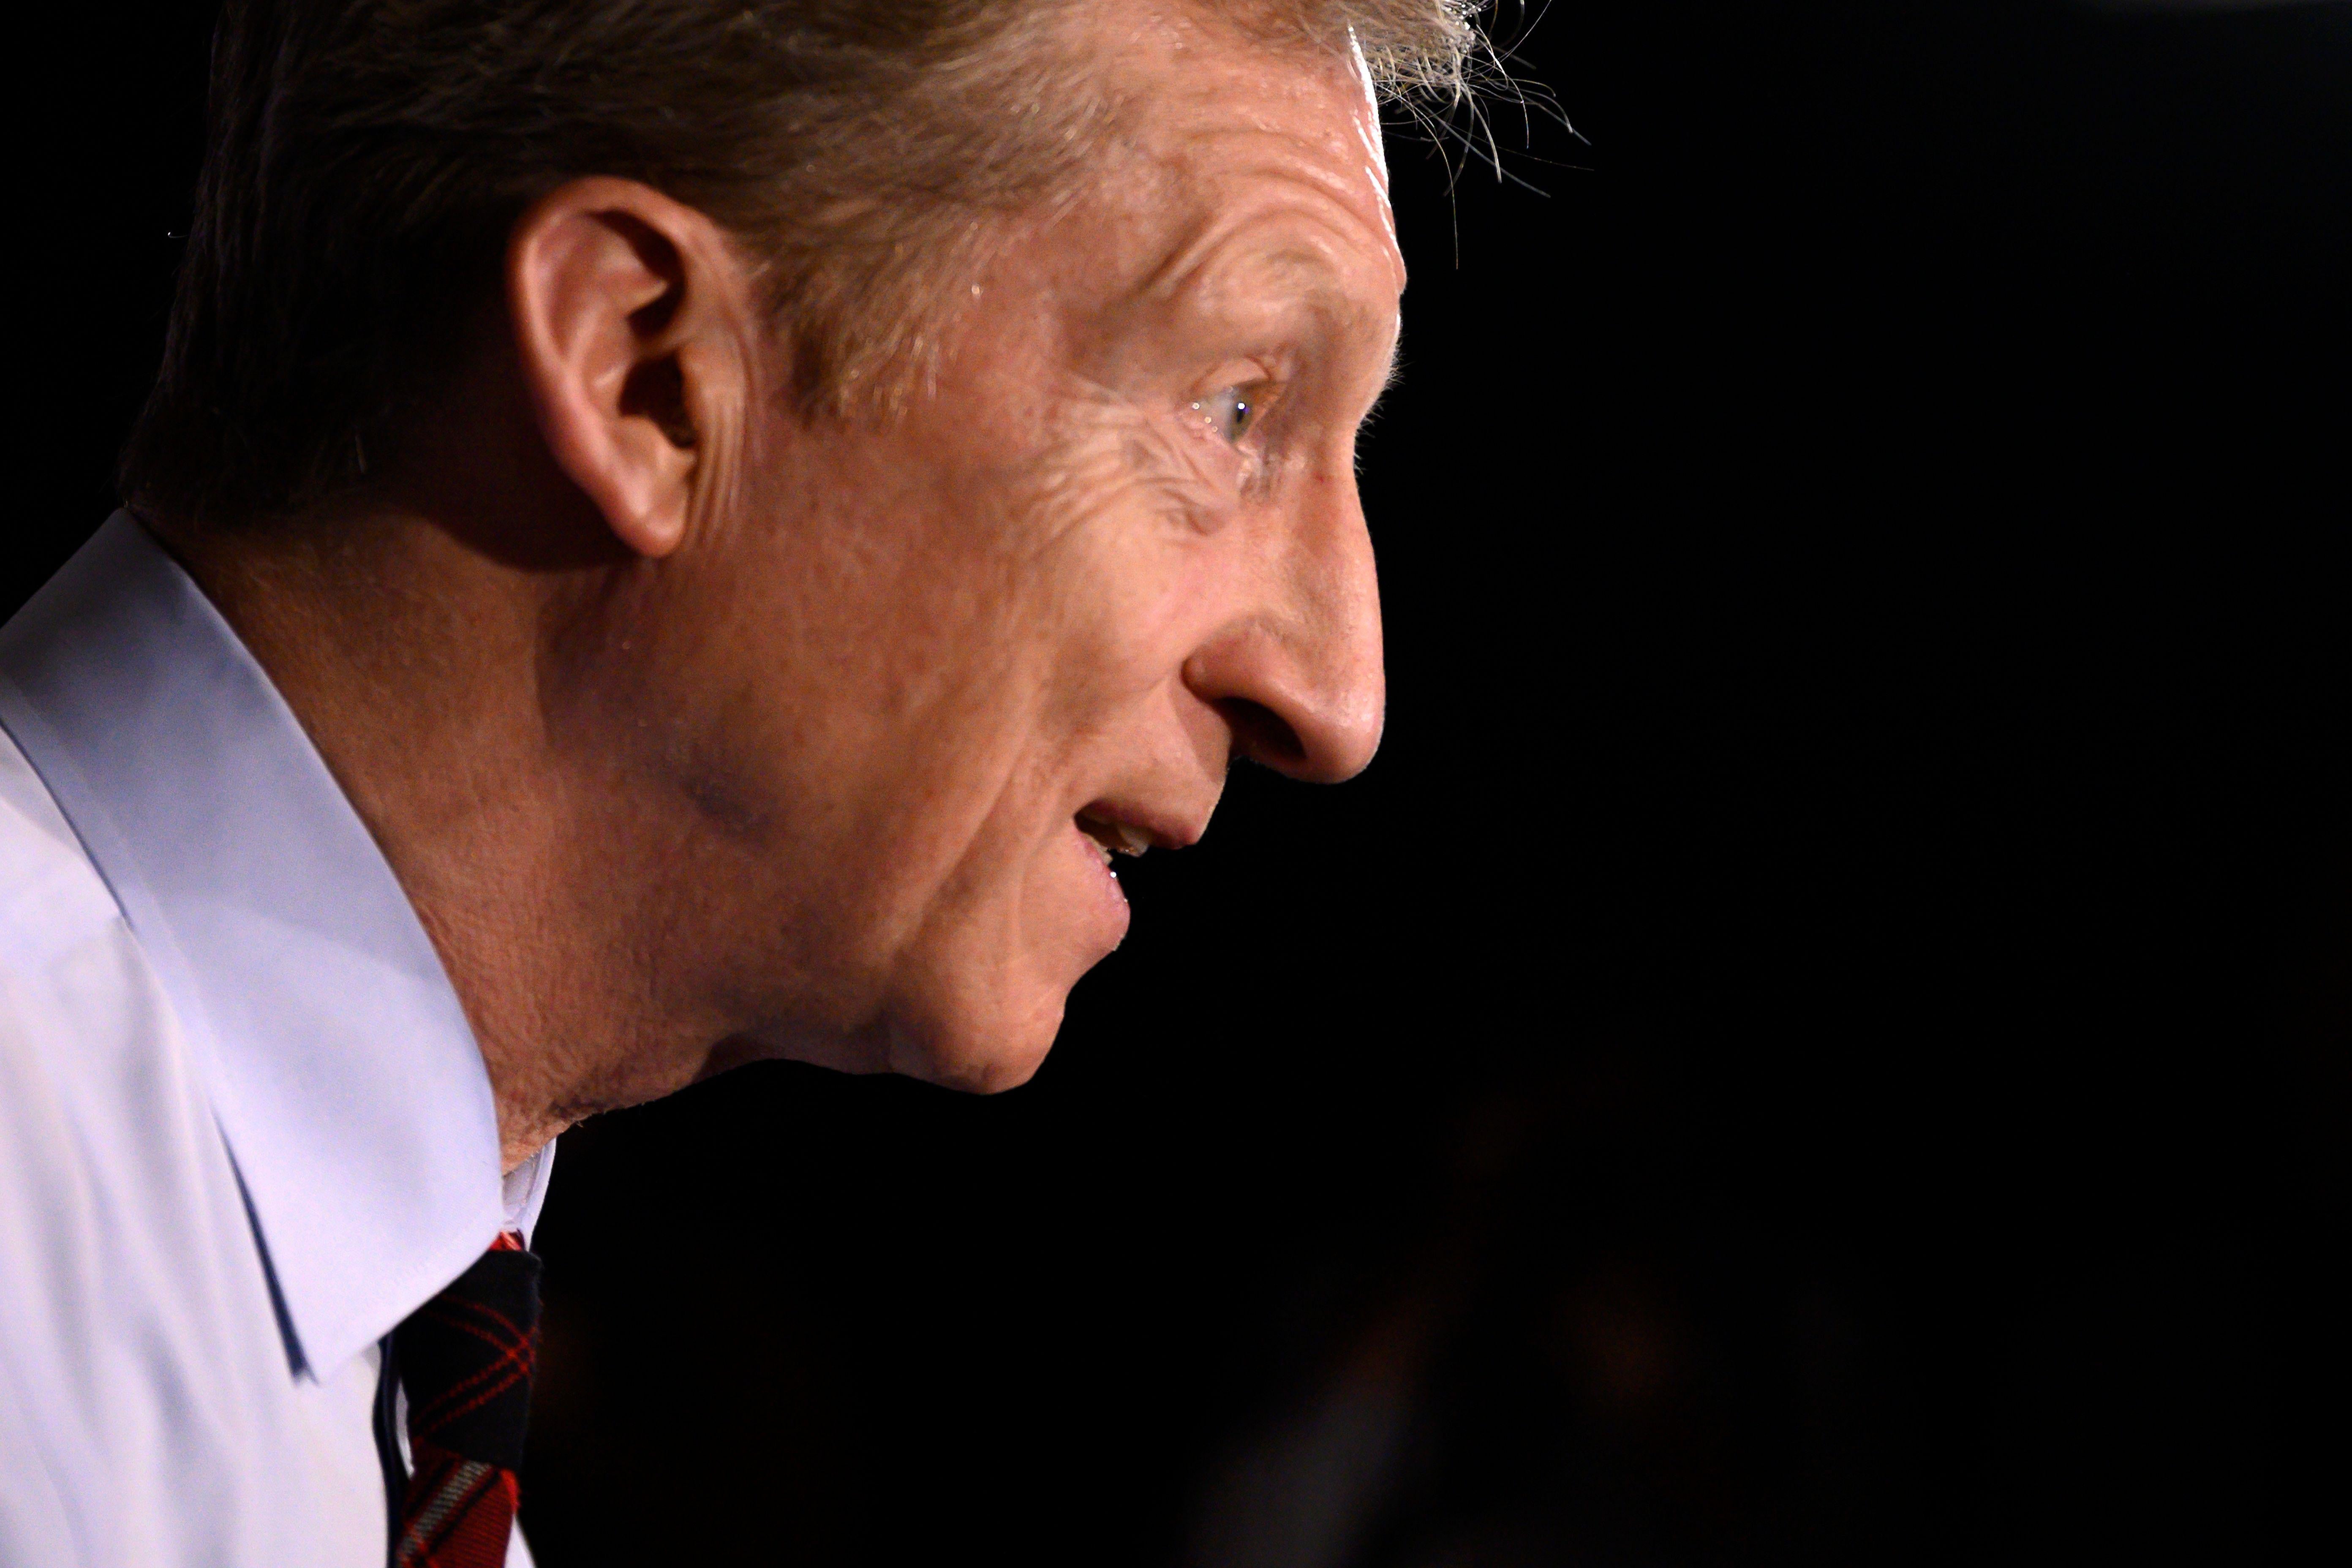 A profile photo of democratic presidential hopeful Tom Steyer's face as he speaks during a town hall.